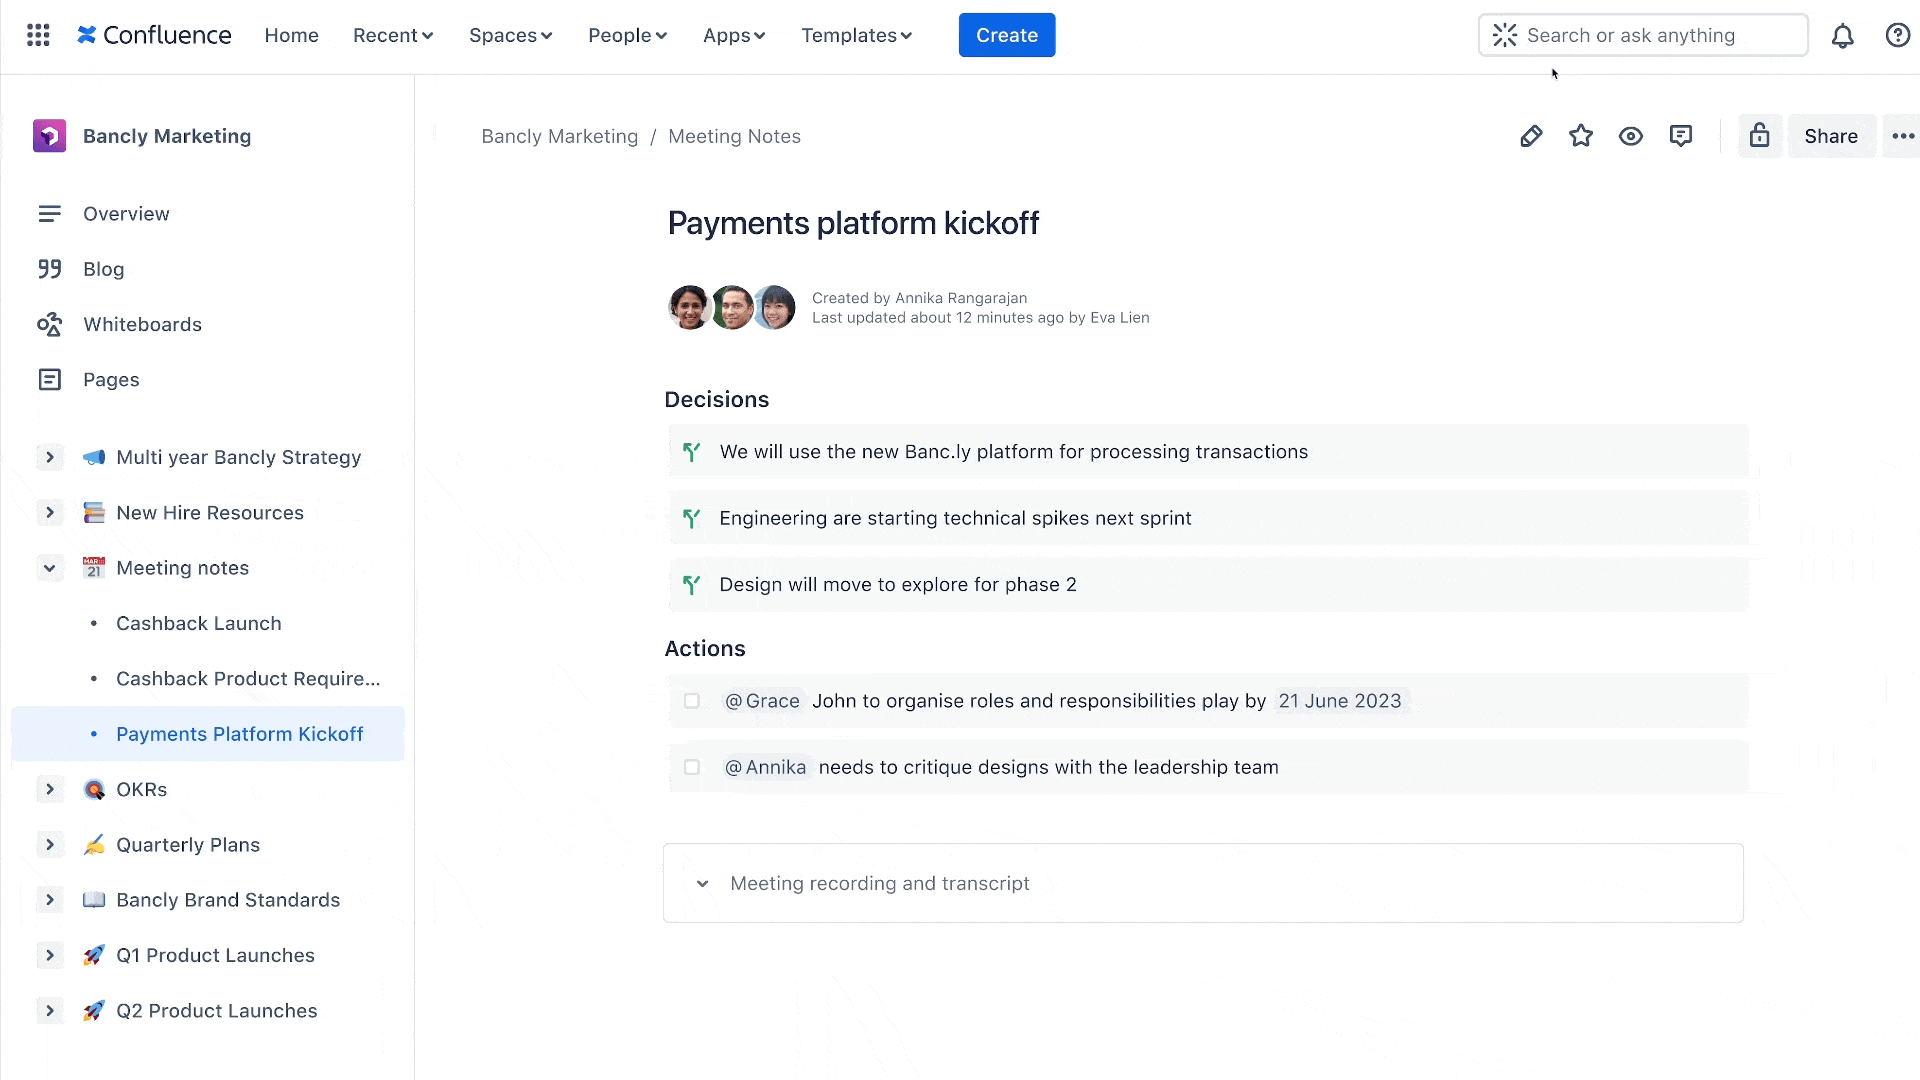 Atlassian Intelligence gives an instant answer to a question, based on content in a plan in Confluence